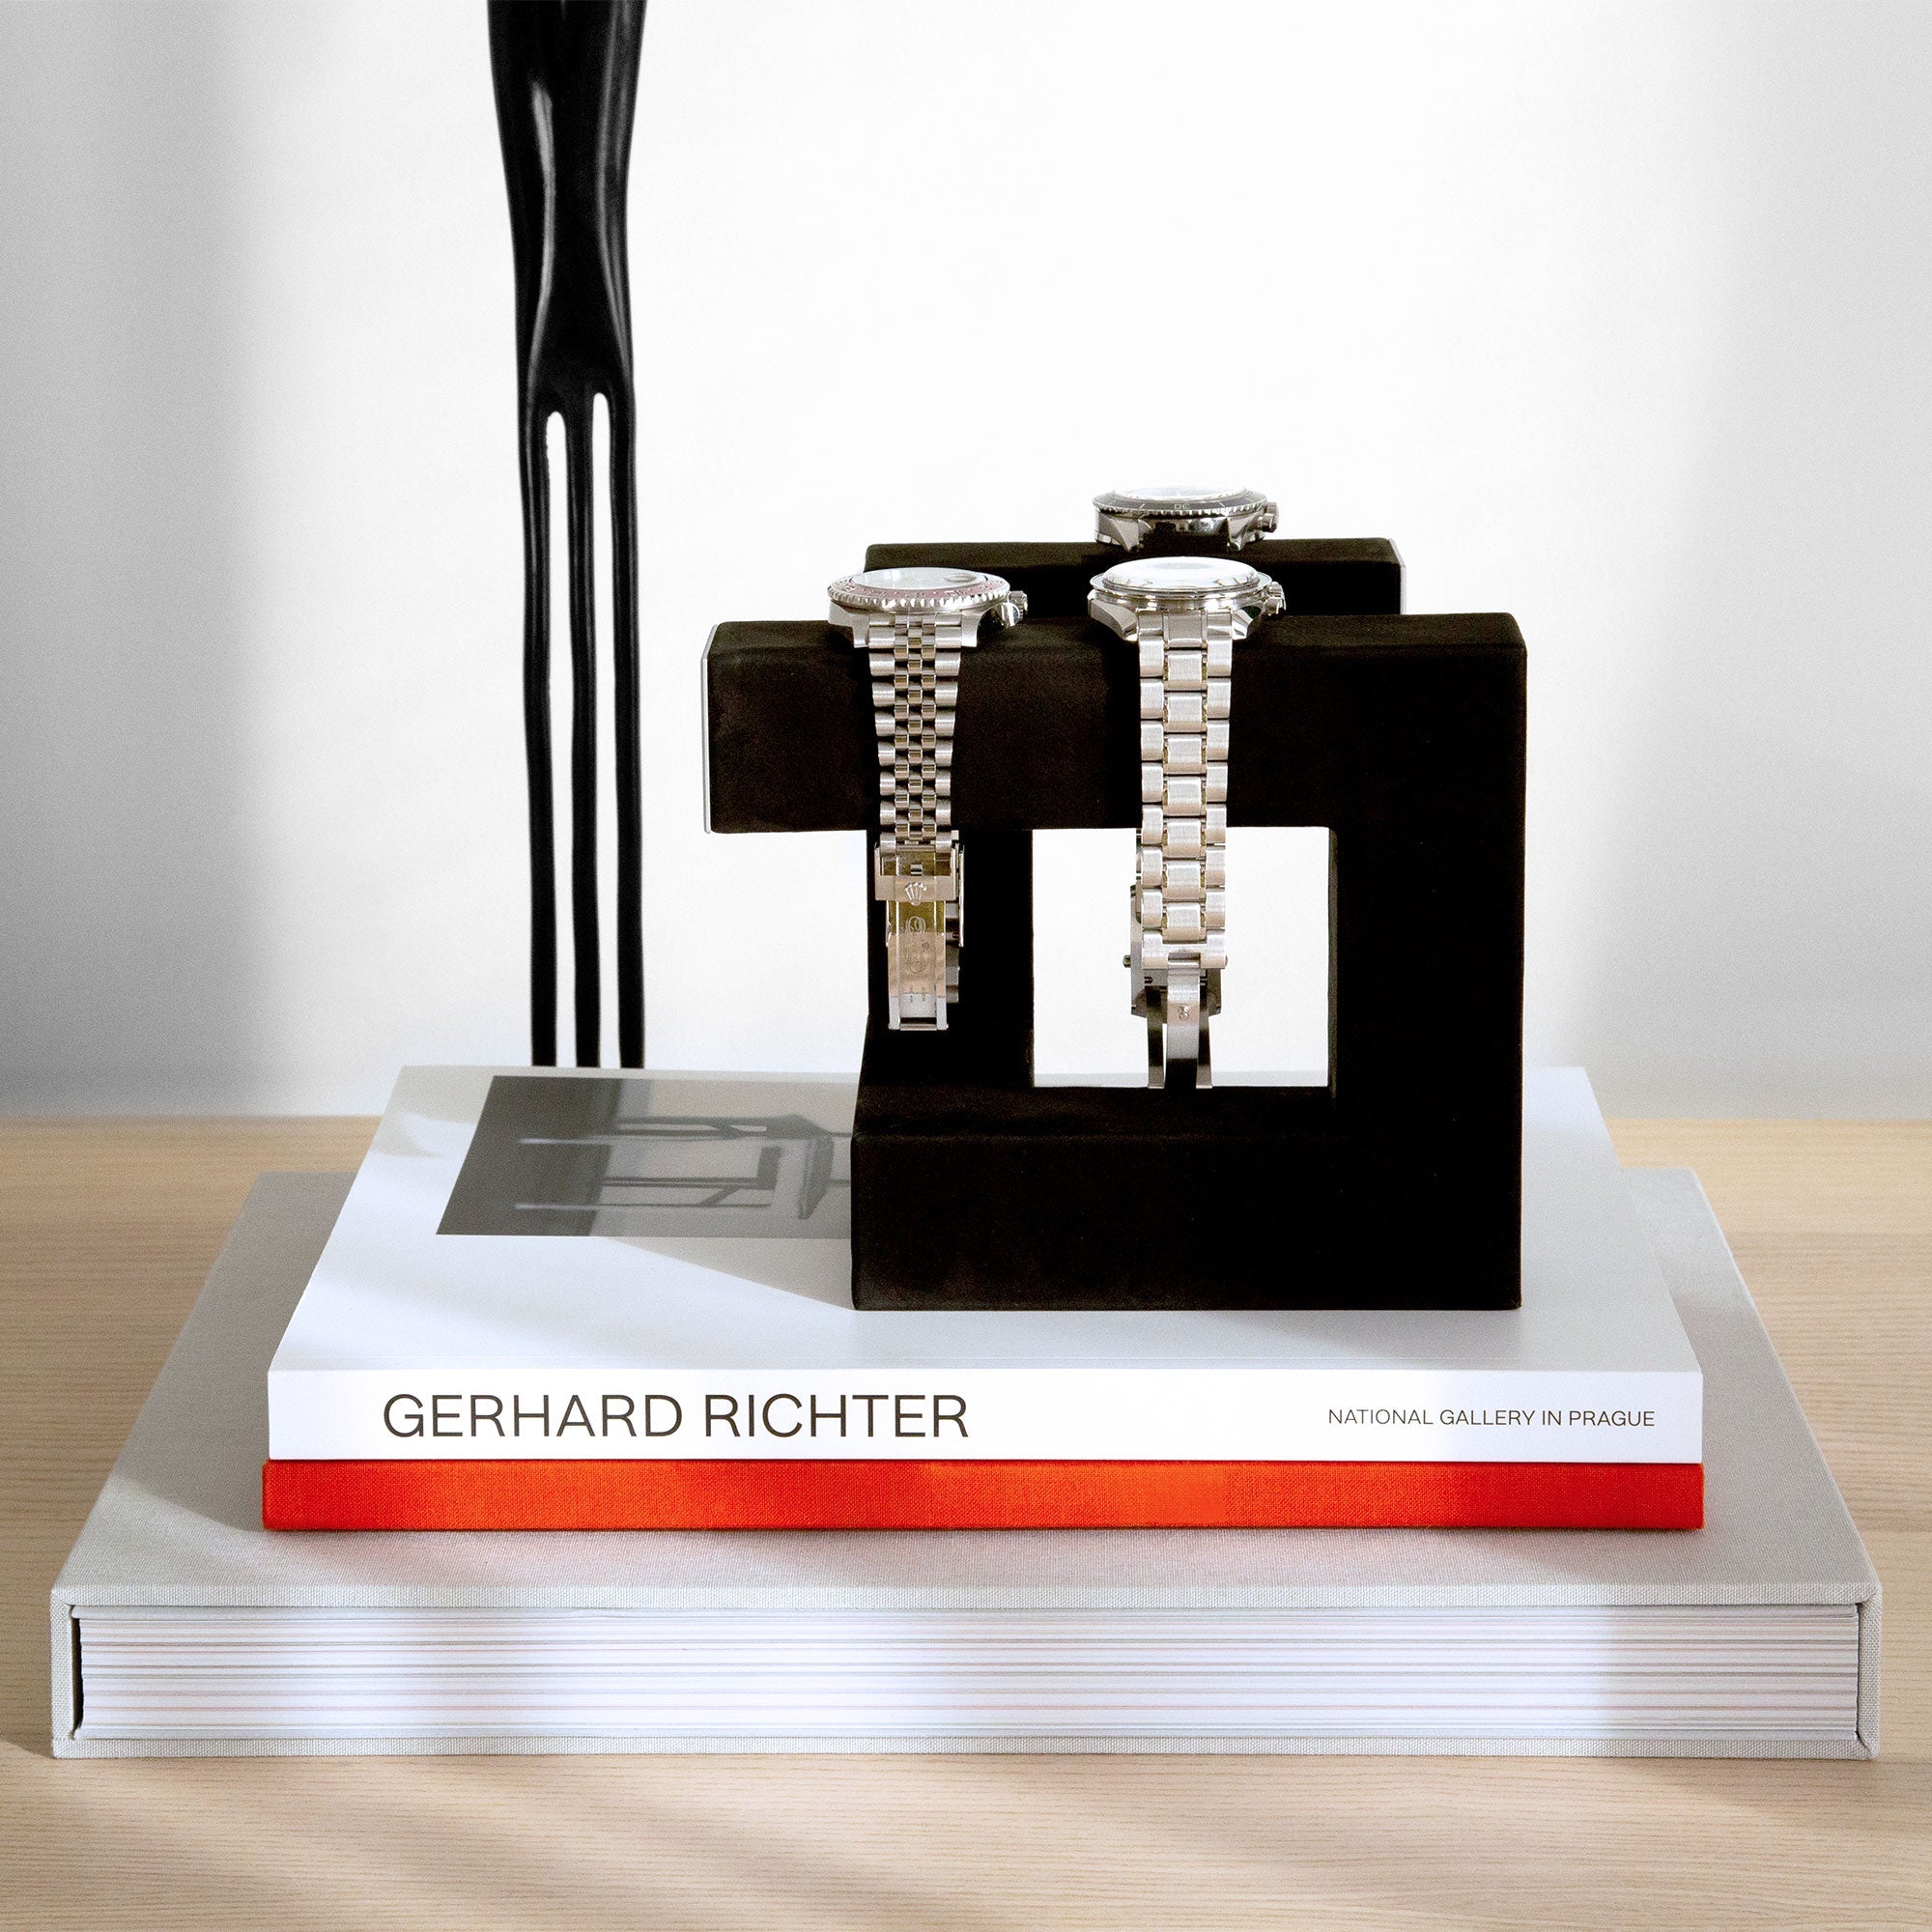 Hudson 3 watch stand in black inspired by modern art and designed to hold and display watches